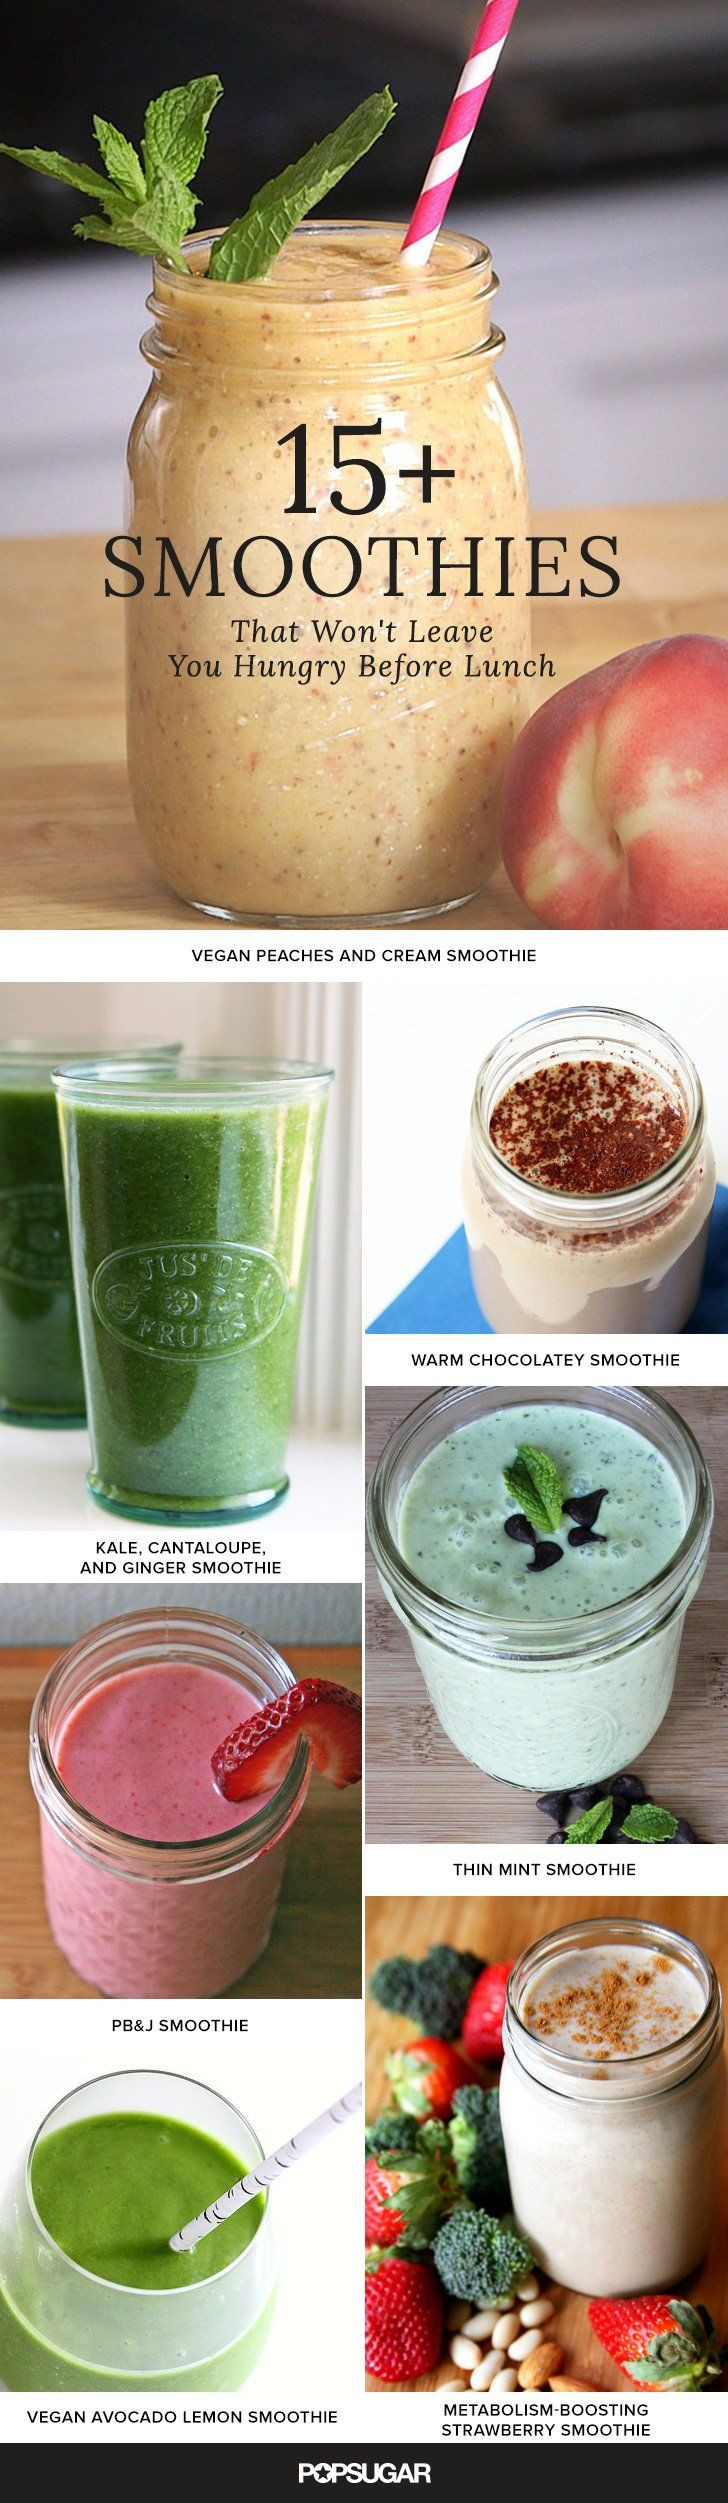 Healthy Smoothie Recipes For Breakfast
 Best 25 Breakfast smoothies ideas on Pinterest